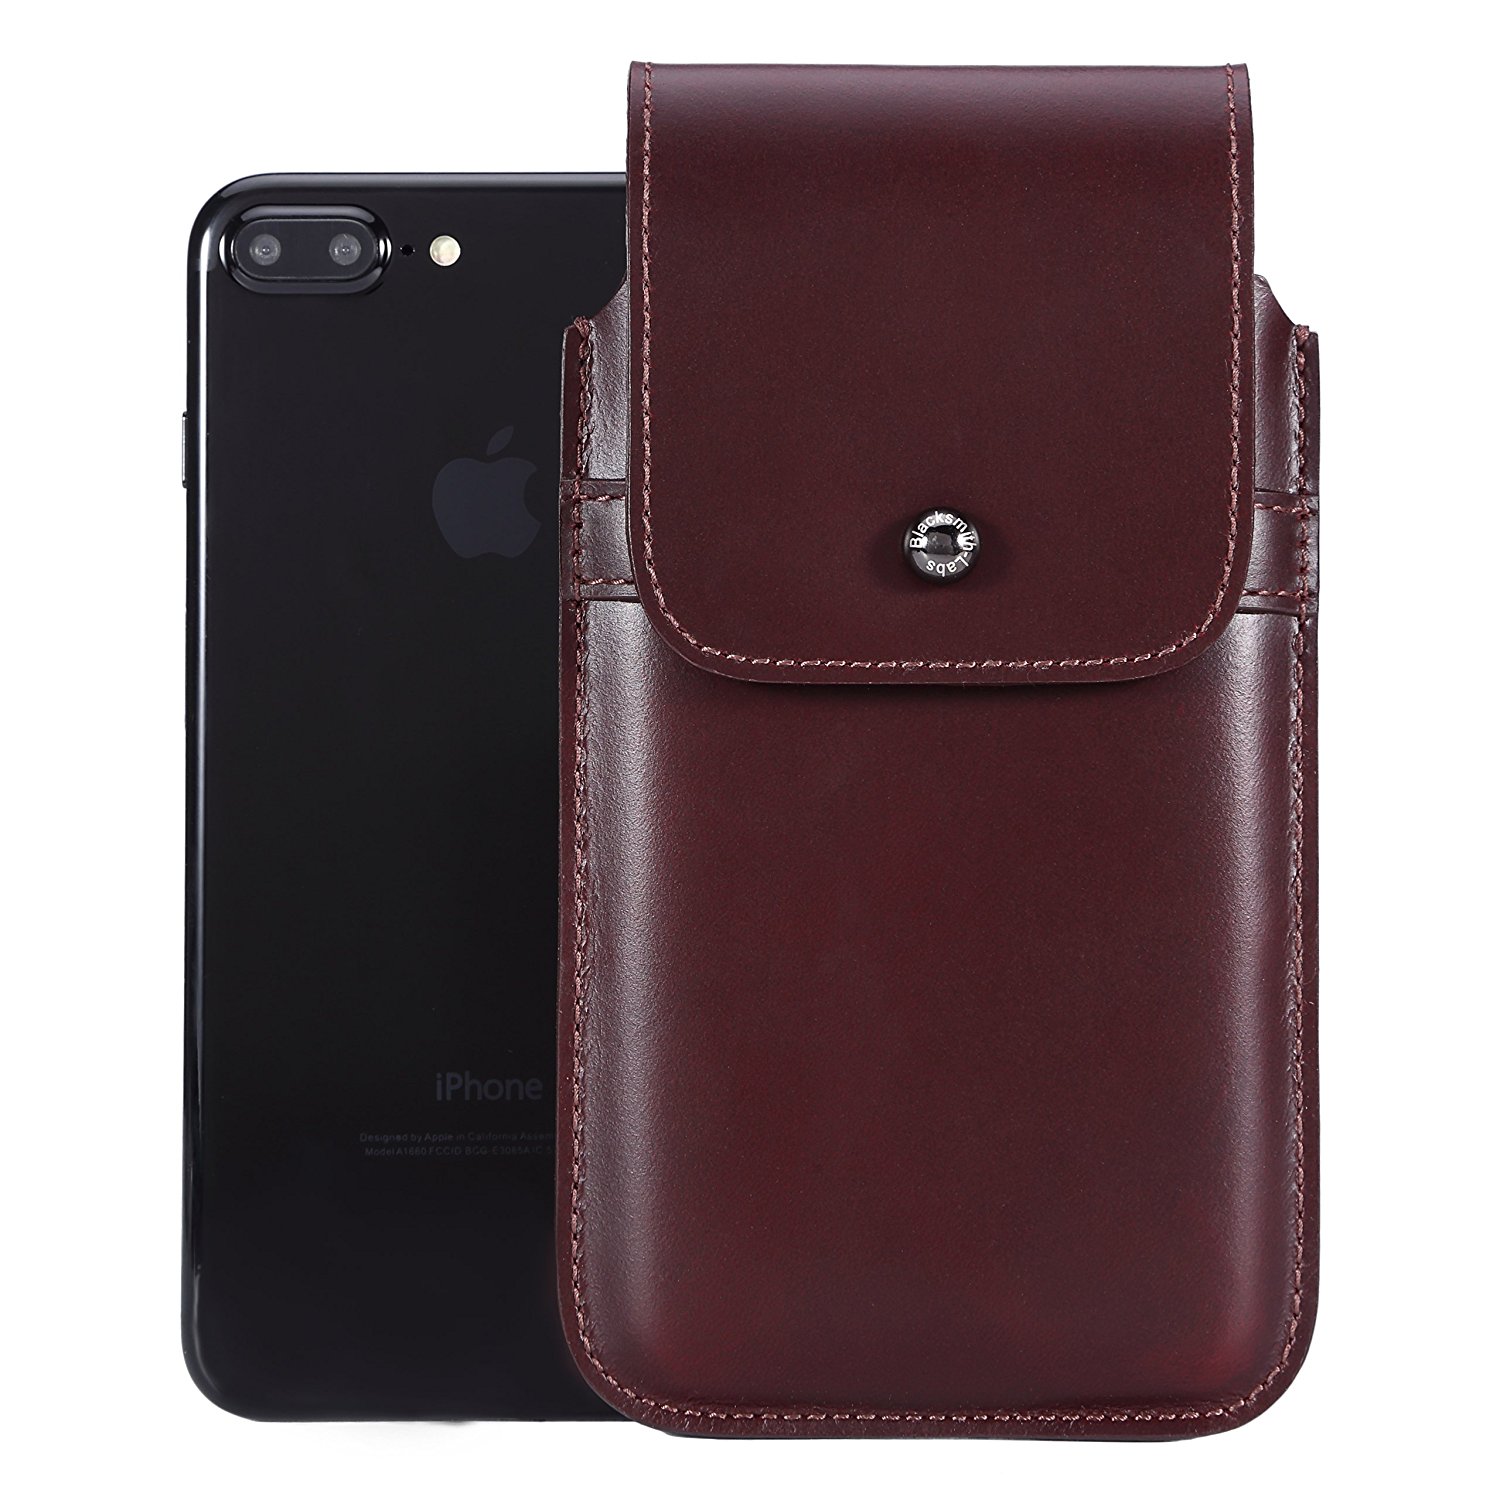 Blacksmith-Labs Holster Case for iPhone 6 Plus; iPhone 6s Plus, iPhone 7 Plus - Brown